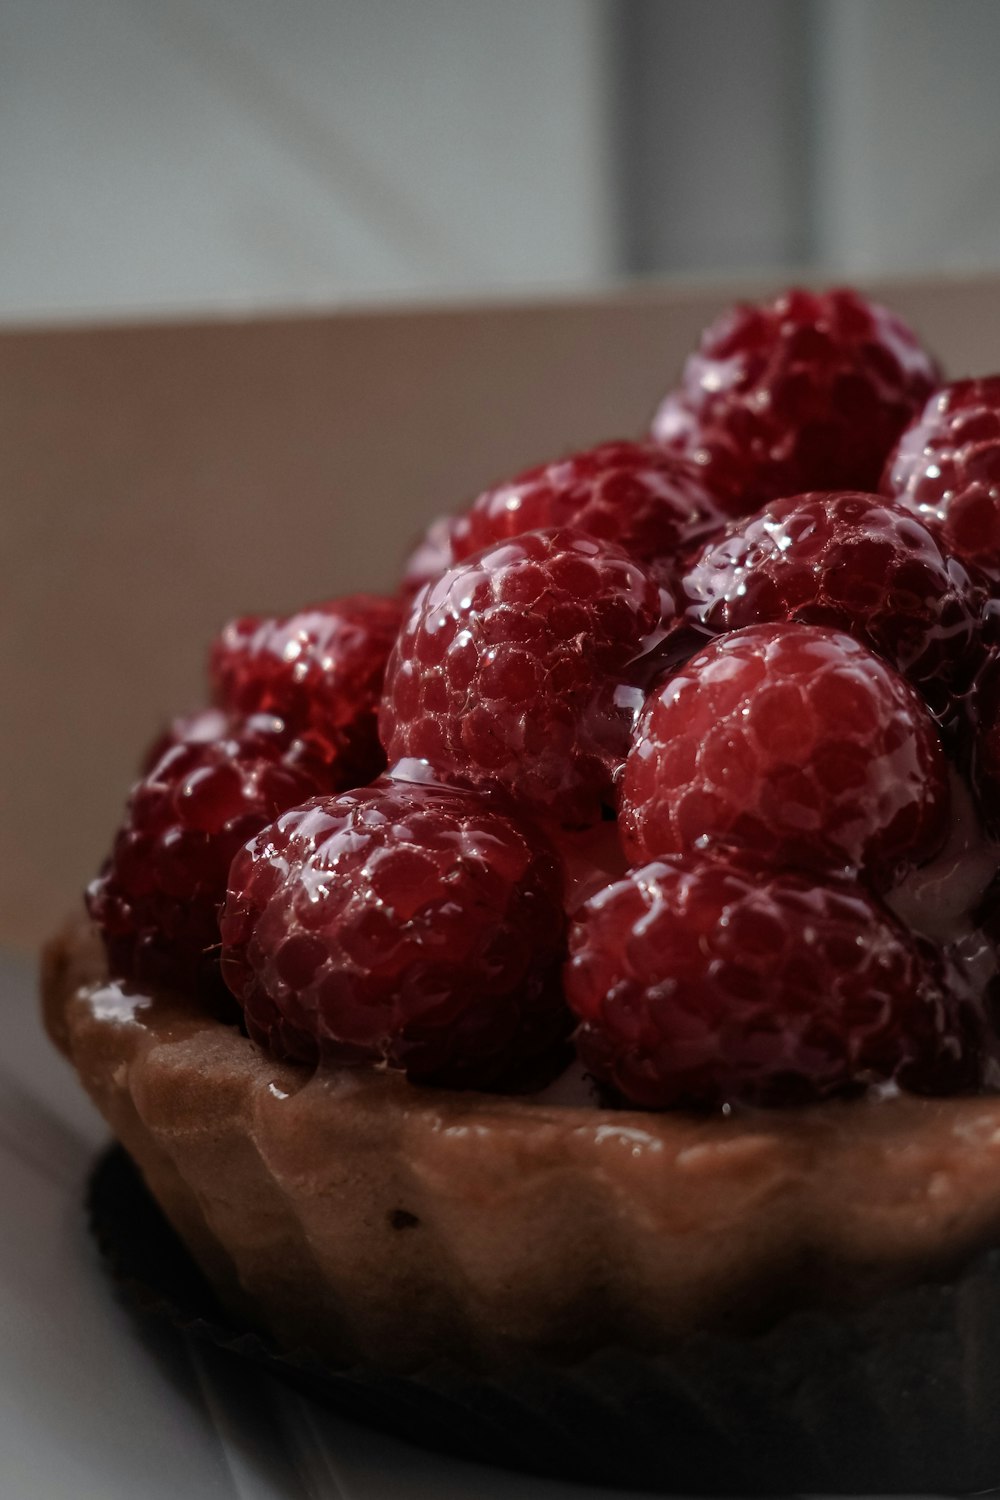 a close up of a bowl of raspberries on a table